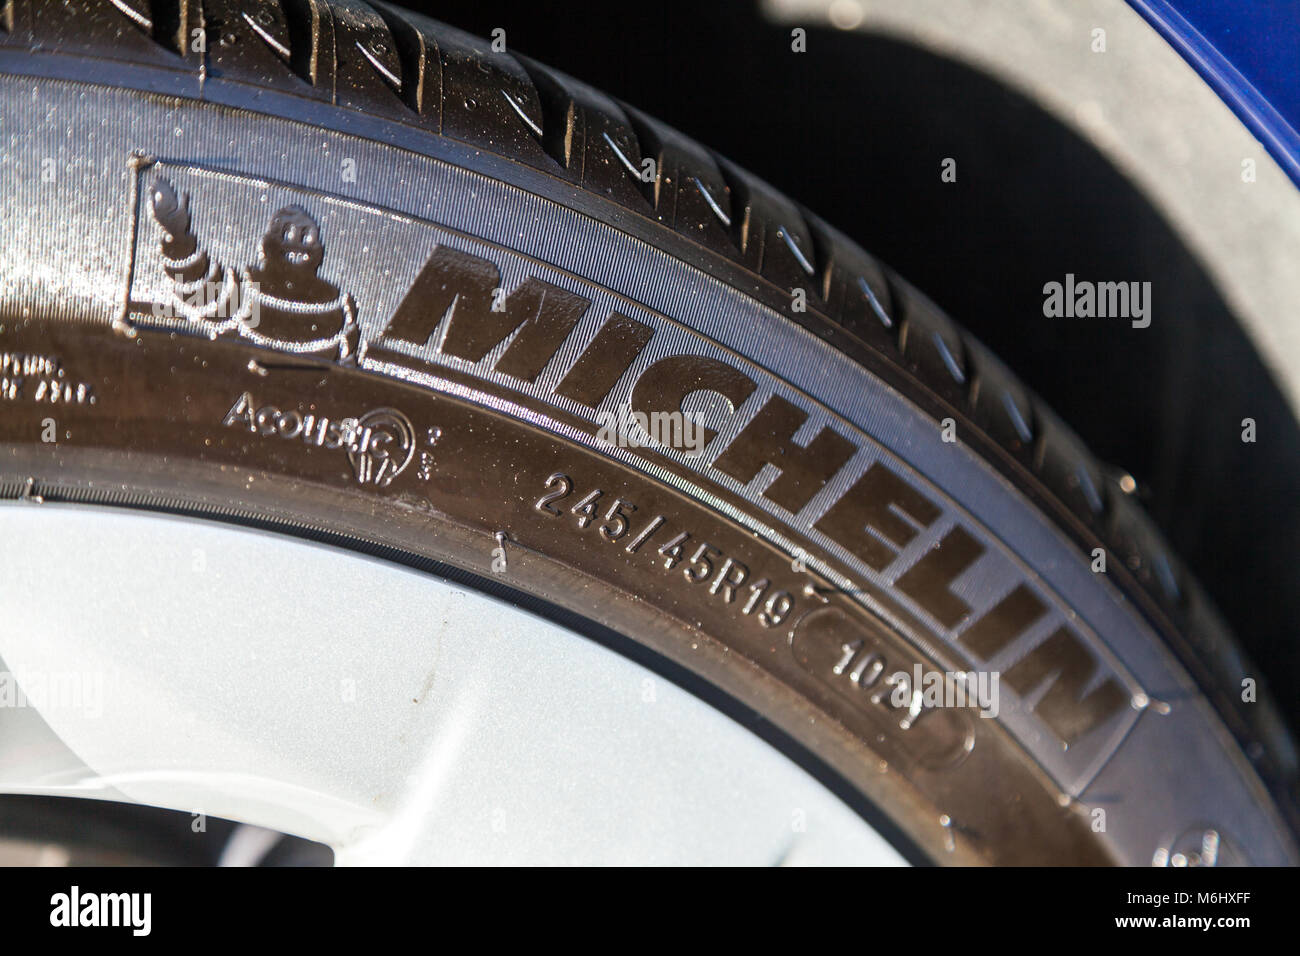 FUERTH / GERMANY - MARCH 4, 2018: Michelin logo on a tire. Michelin is a French tyre manufacturer based in Clermont-Ferrand in the Auvergne région of  Stock Photo